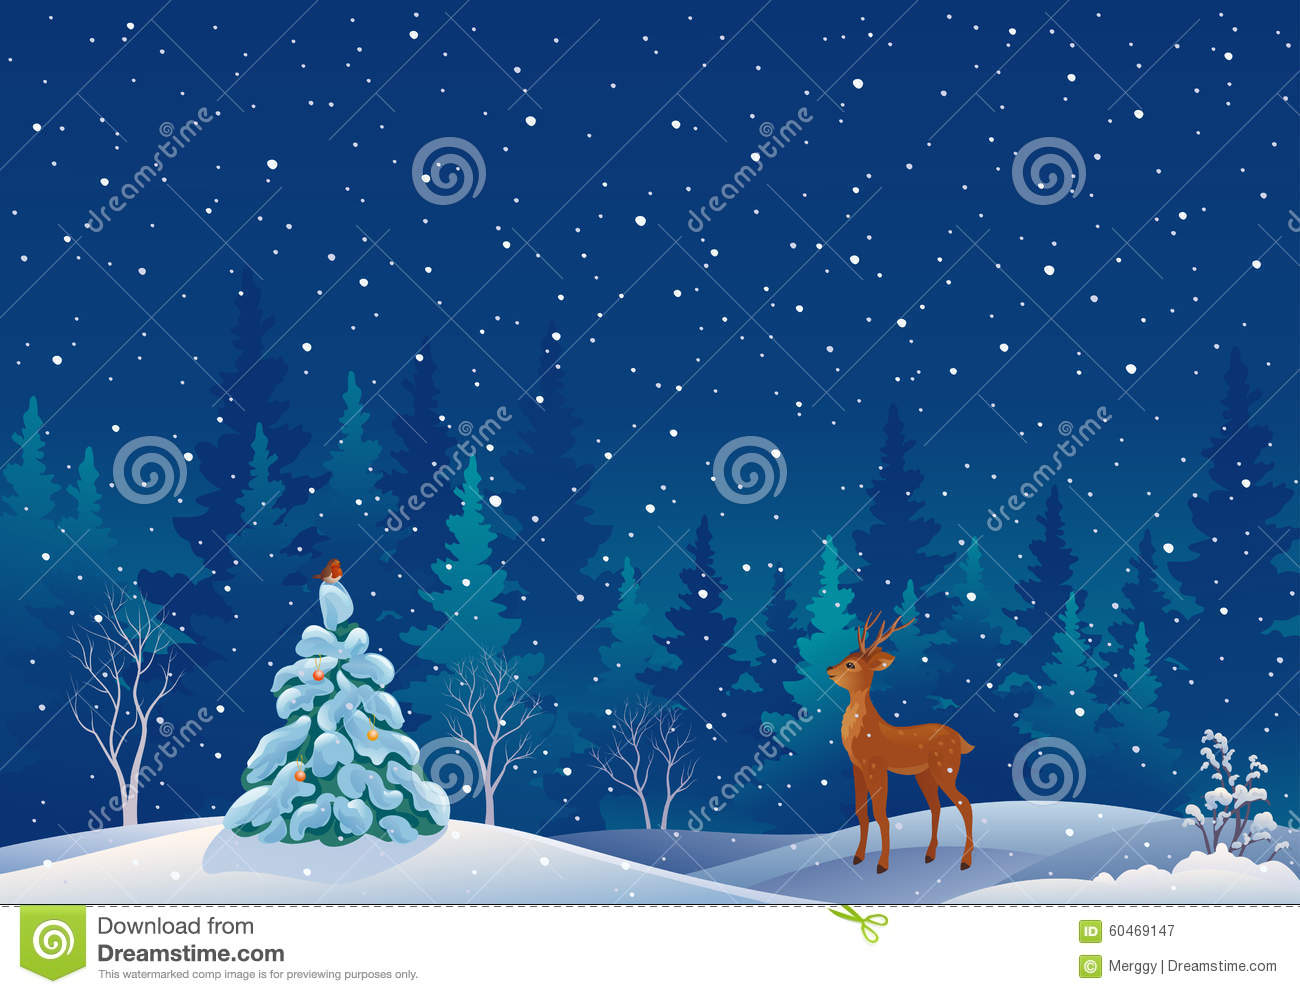 Illustration Of A Beautiful Snowy Christmas Forest Scene With A Deer